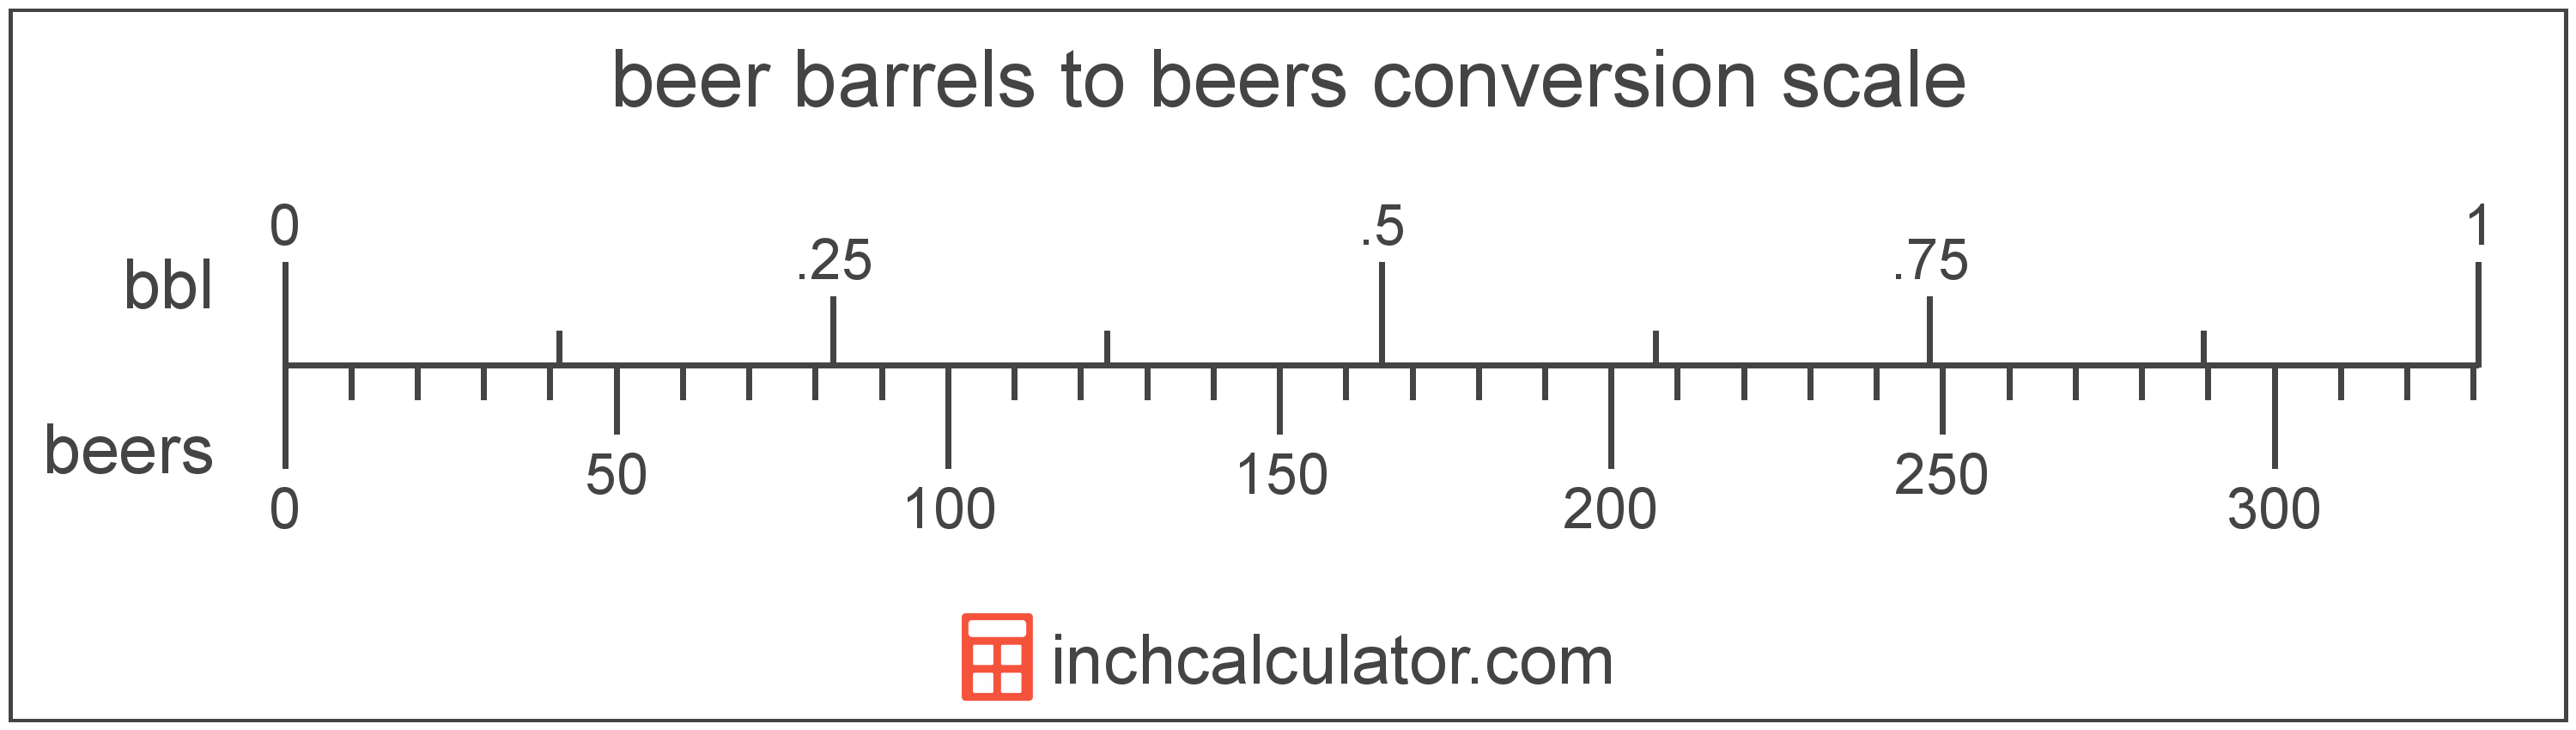 conversion scale showing beers and equivalent beer barrels beer volume values